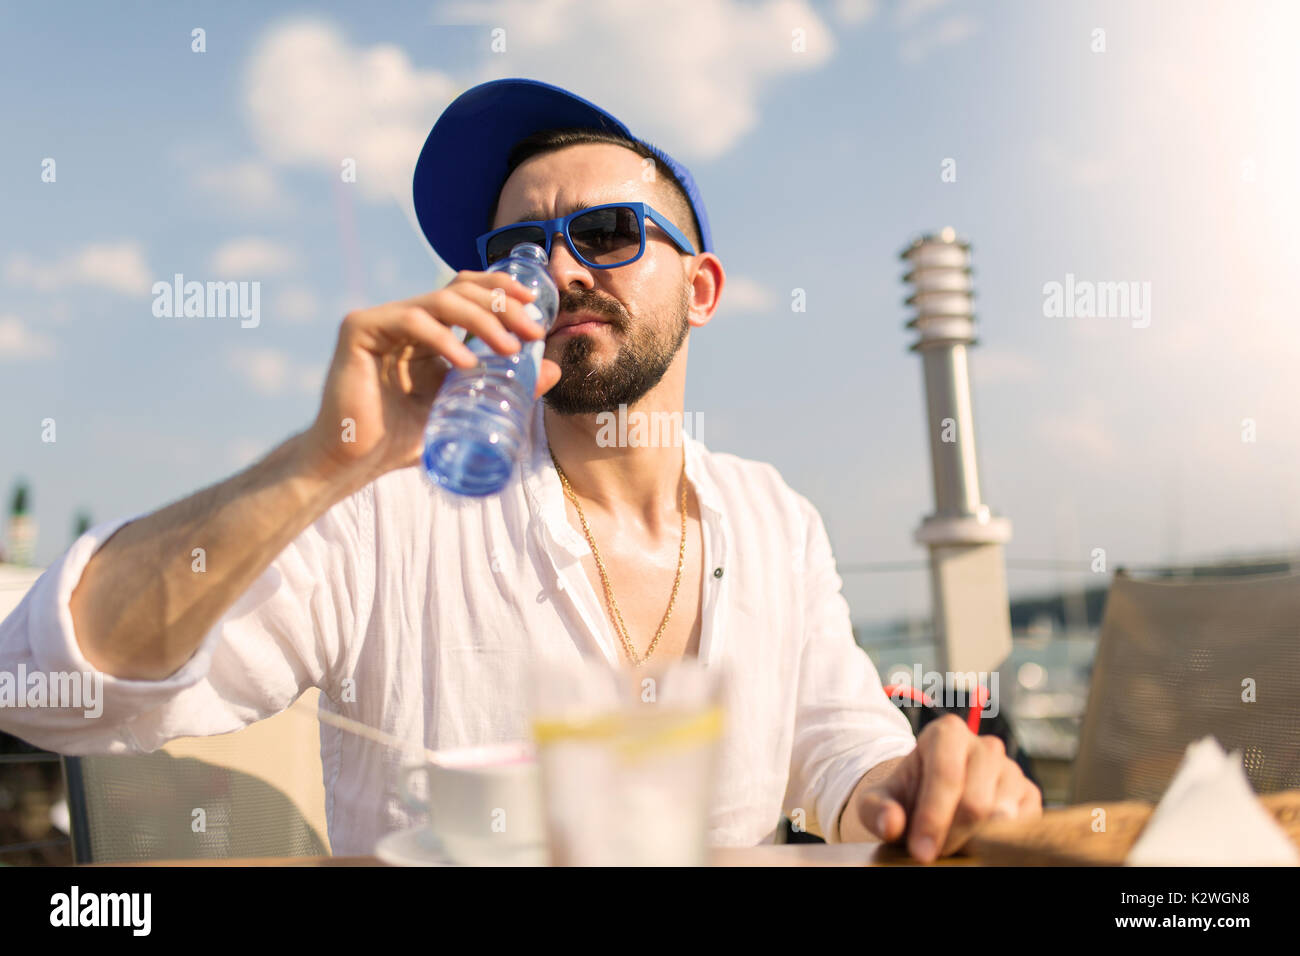 Young man drinking mineral water in outdoor restaurant during extremely hot day Stock Photo